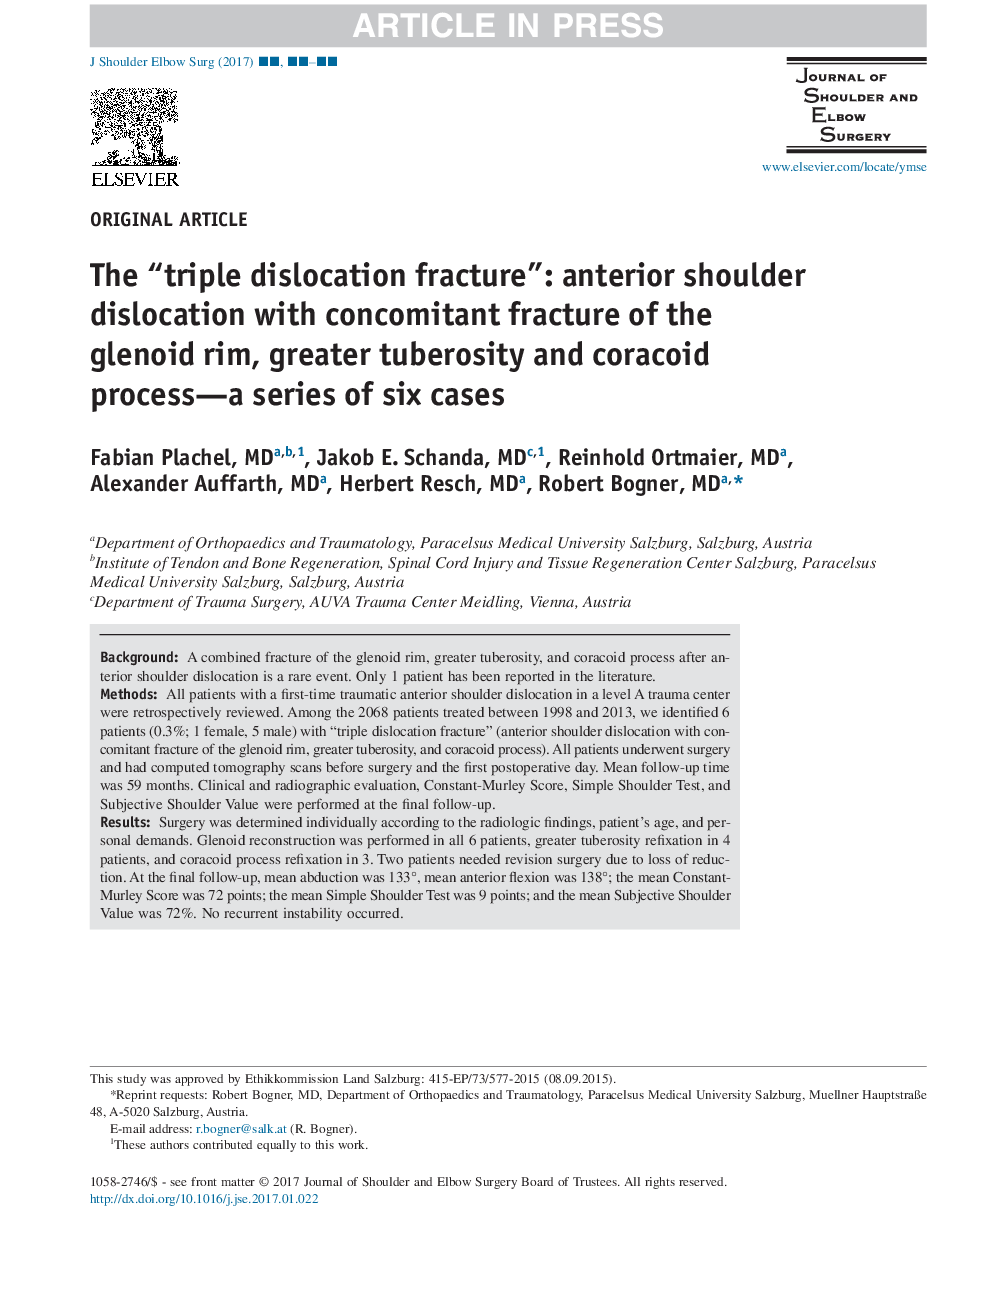 The “triple dislocation fracture”: anterior shoulder dislocation with concomitant fracture of the glenoid rim, greater tuberosity and coracoid process-a series of six cases